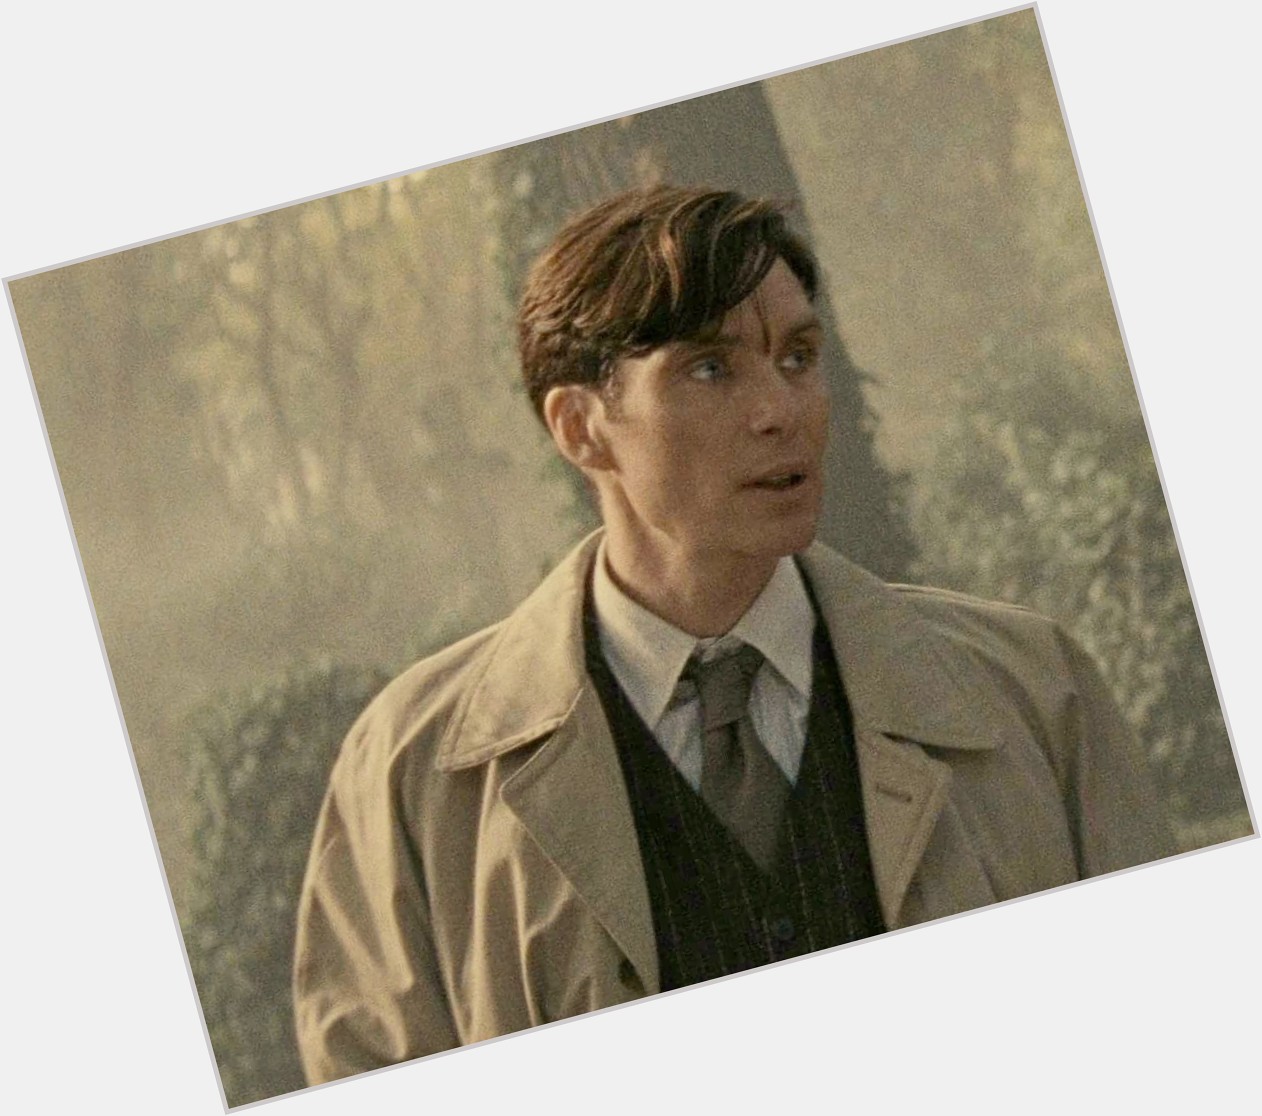       HAPPY BDAY TO THE GREAT CILLIAN MURPHY      